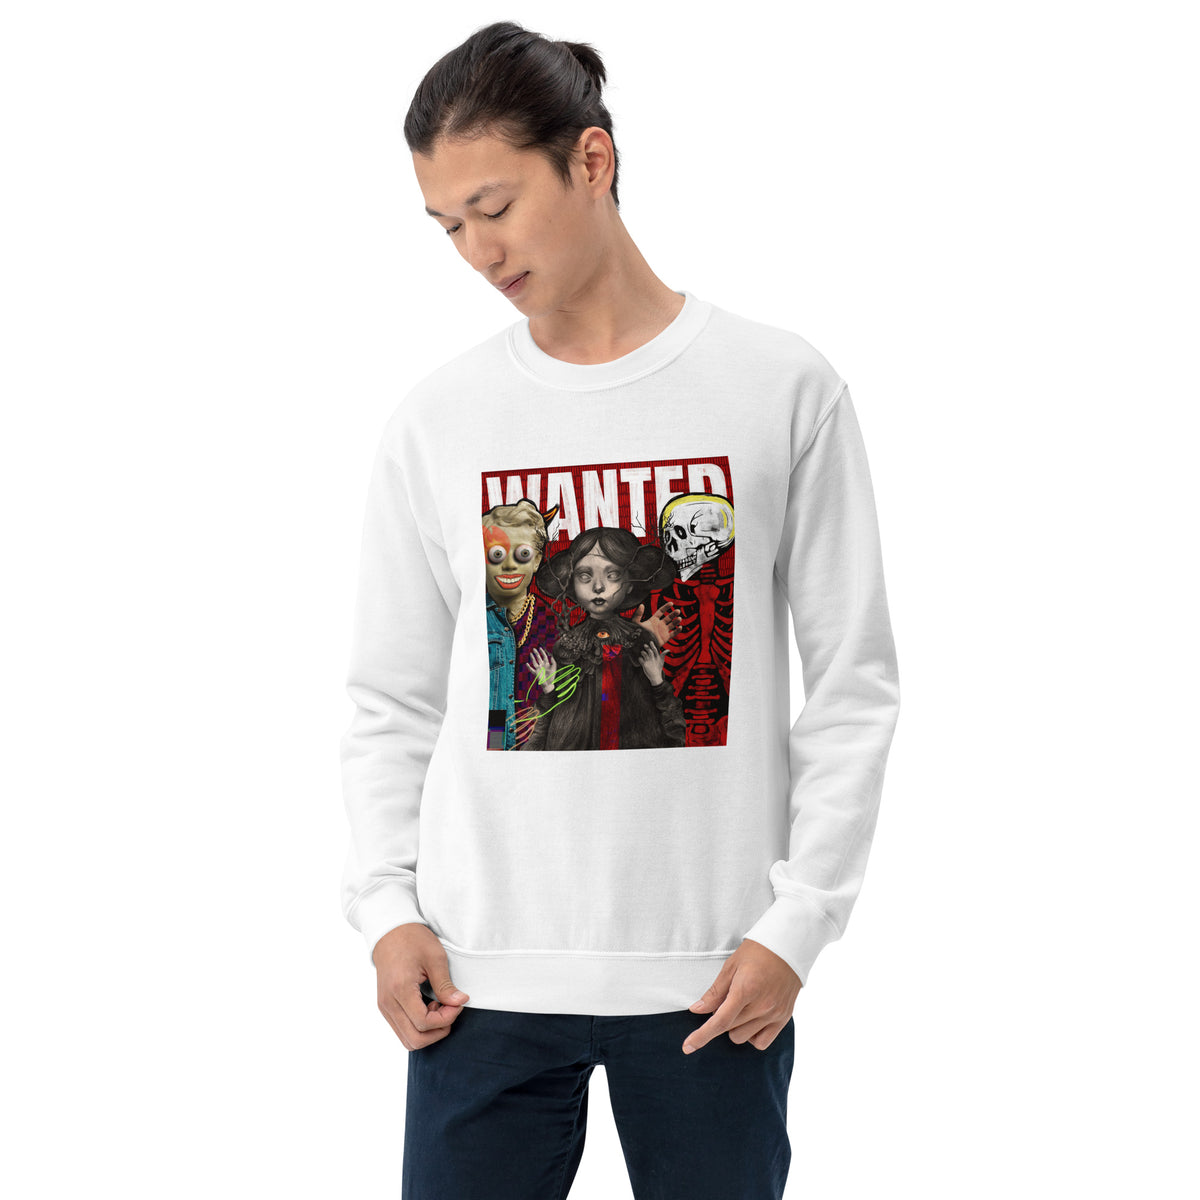 Wanted by Dolce Paganne | Unisex Sweatshirt